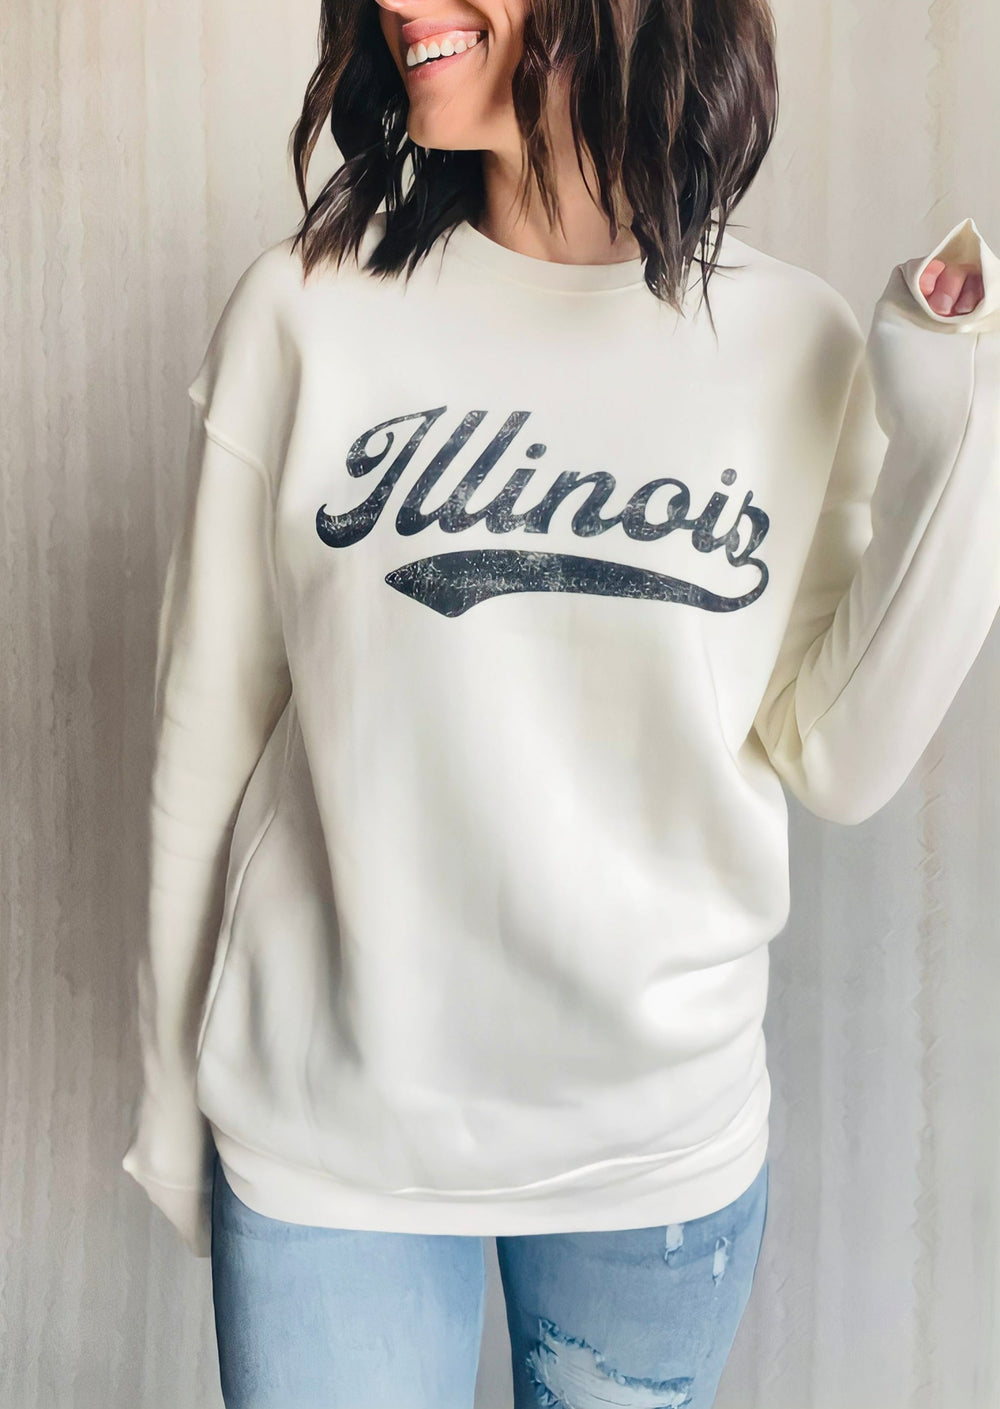 White Illinois Sweatshirt with Vintage Look | Central Illinois Women's Online Clothing Boutique near Champaign-Urbana